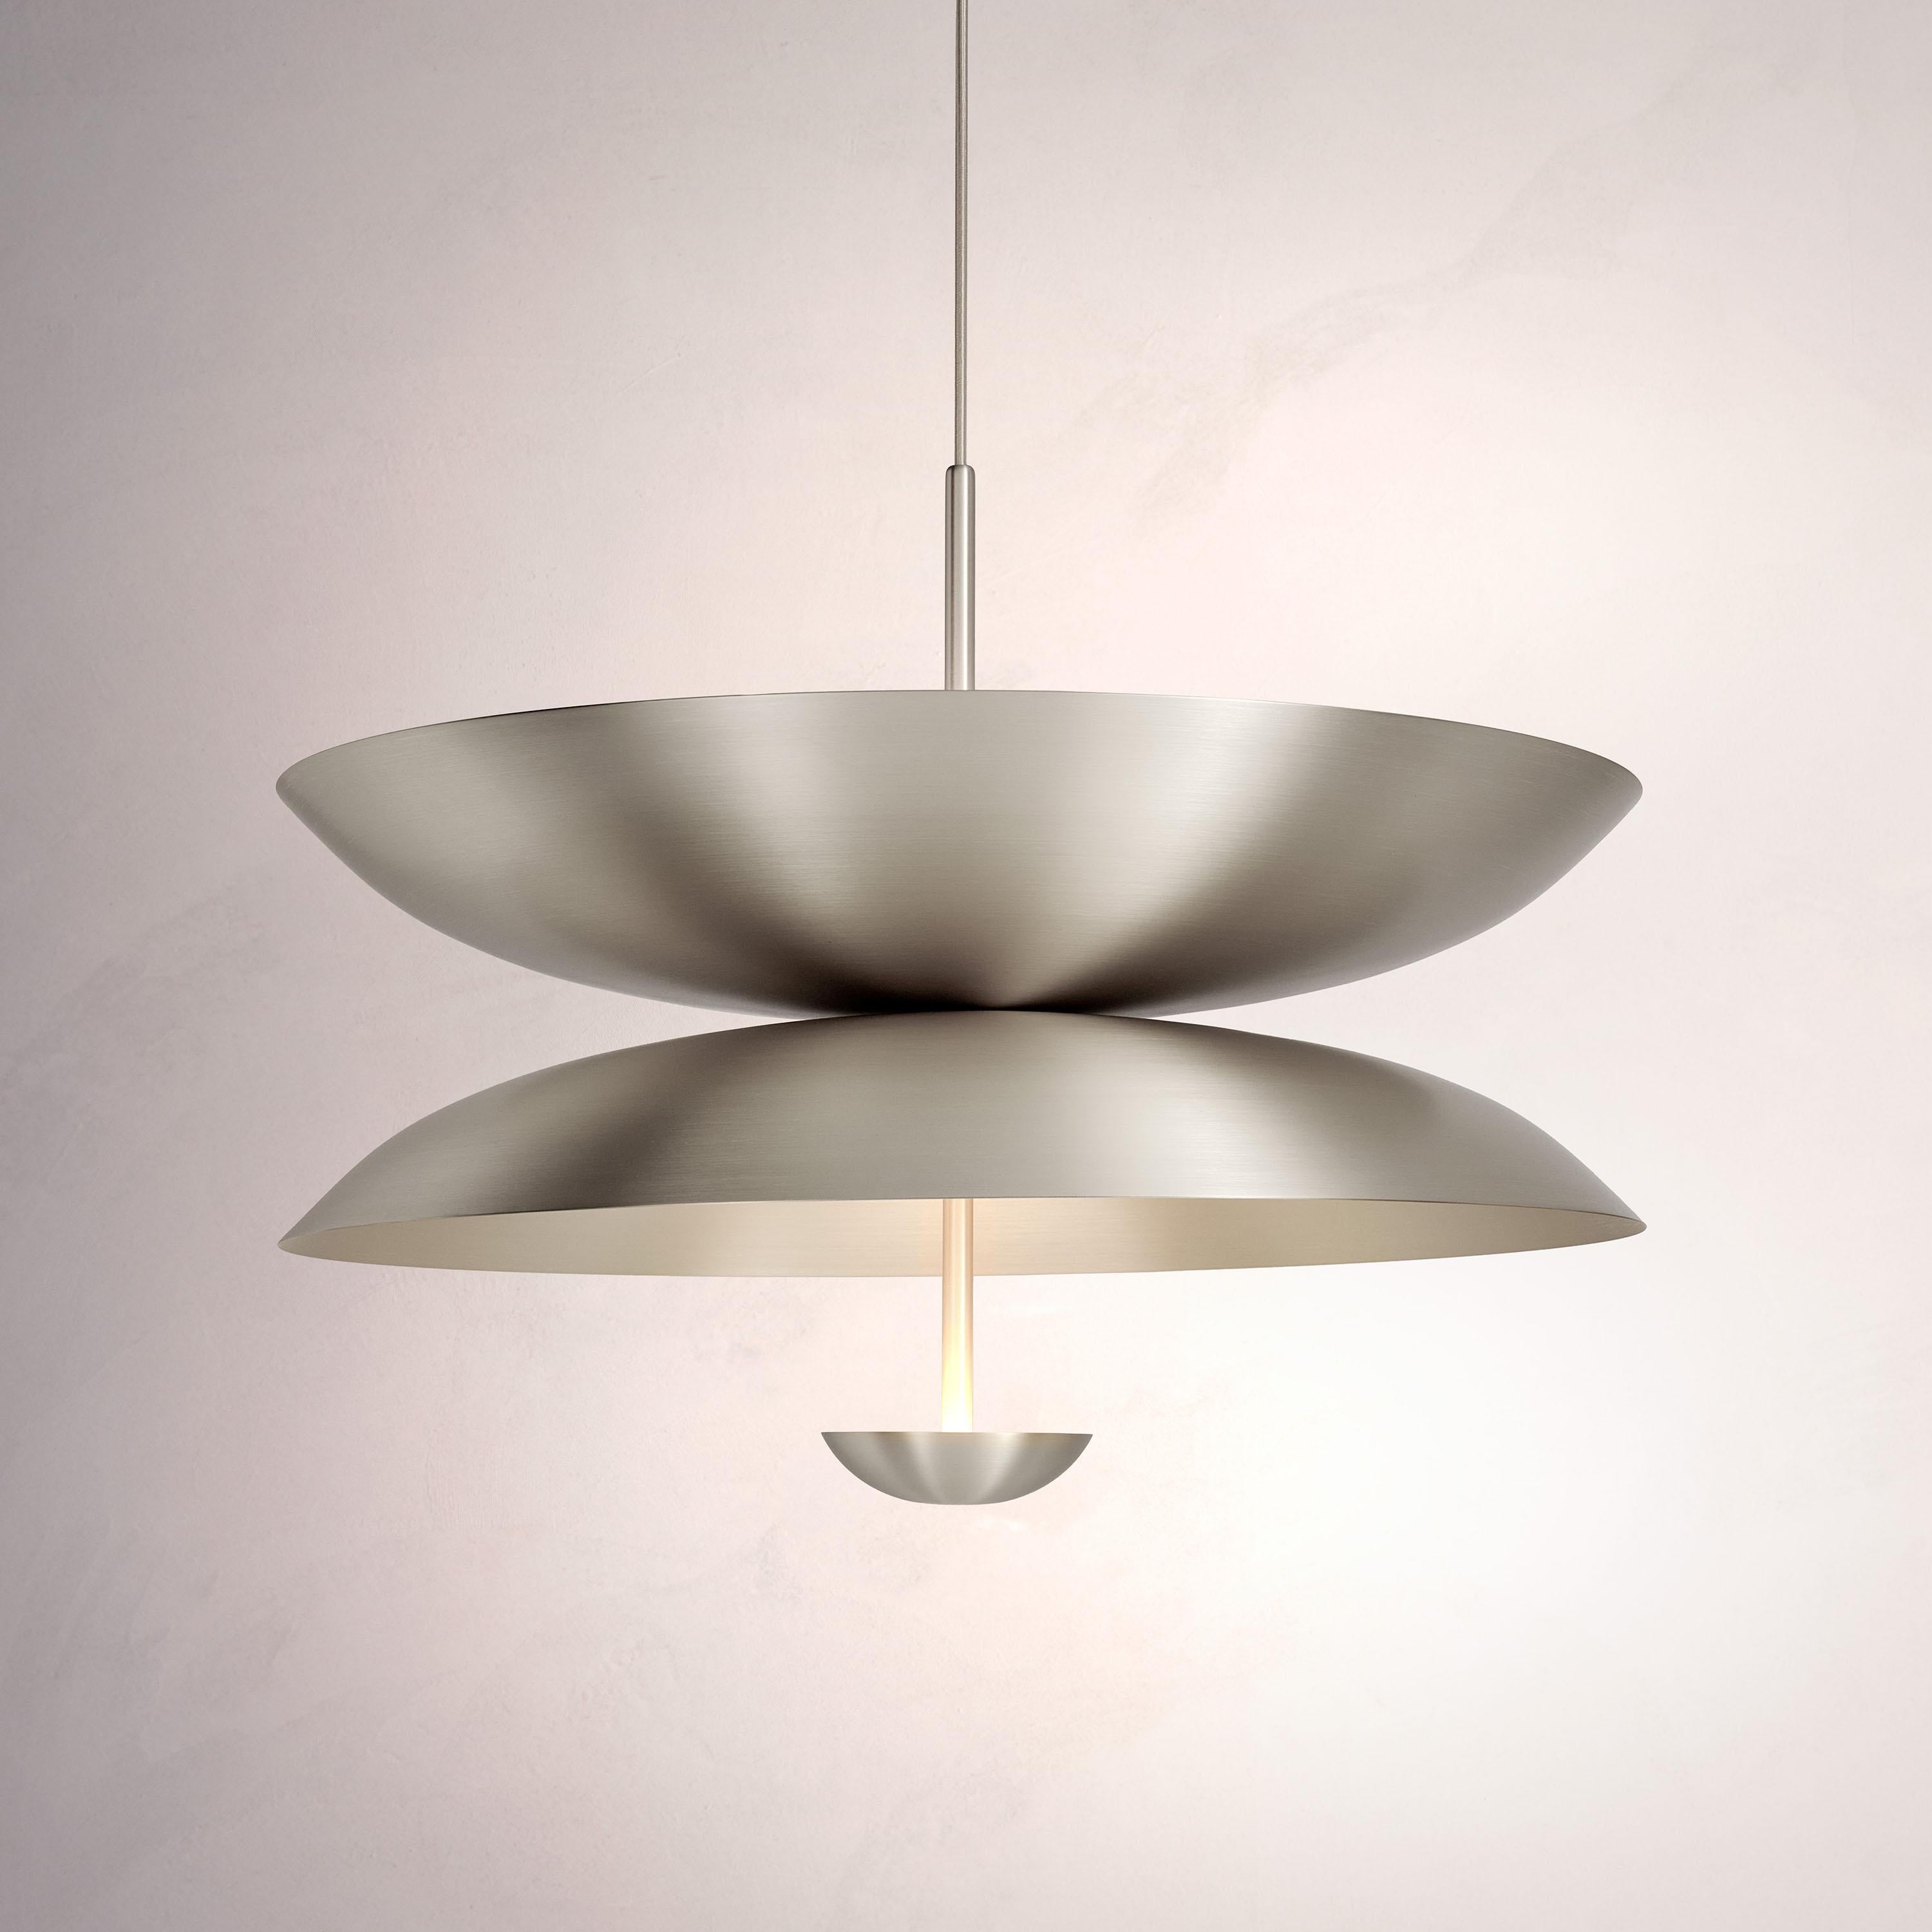 Inspired by planet-like shapes and textures, the Cosmic collection plays with both metal properties and a selection of patina finishes.
 
The Pendant Duo Seleno is composed of three carefully hand-spun steel plates and preserves the beautiful